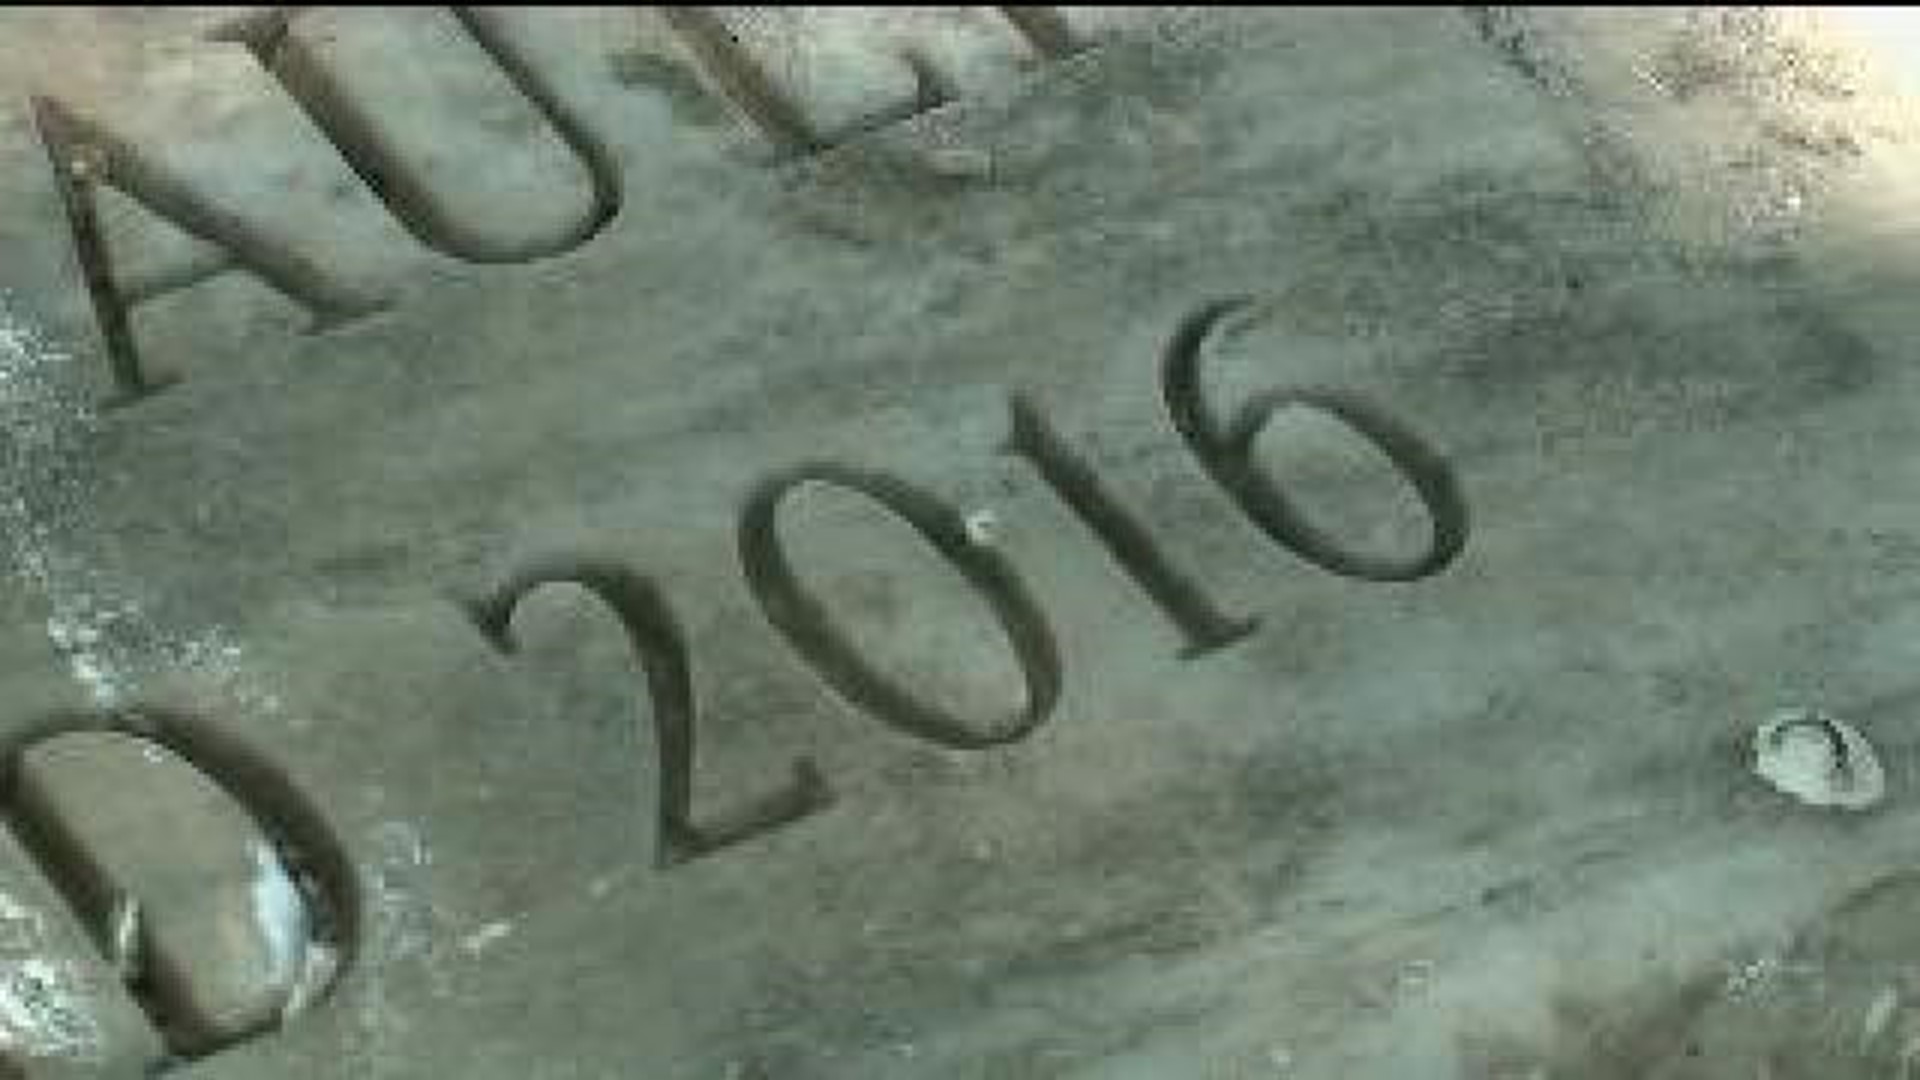 UPDATE: Time Capsule Found Safe